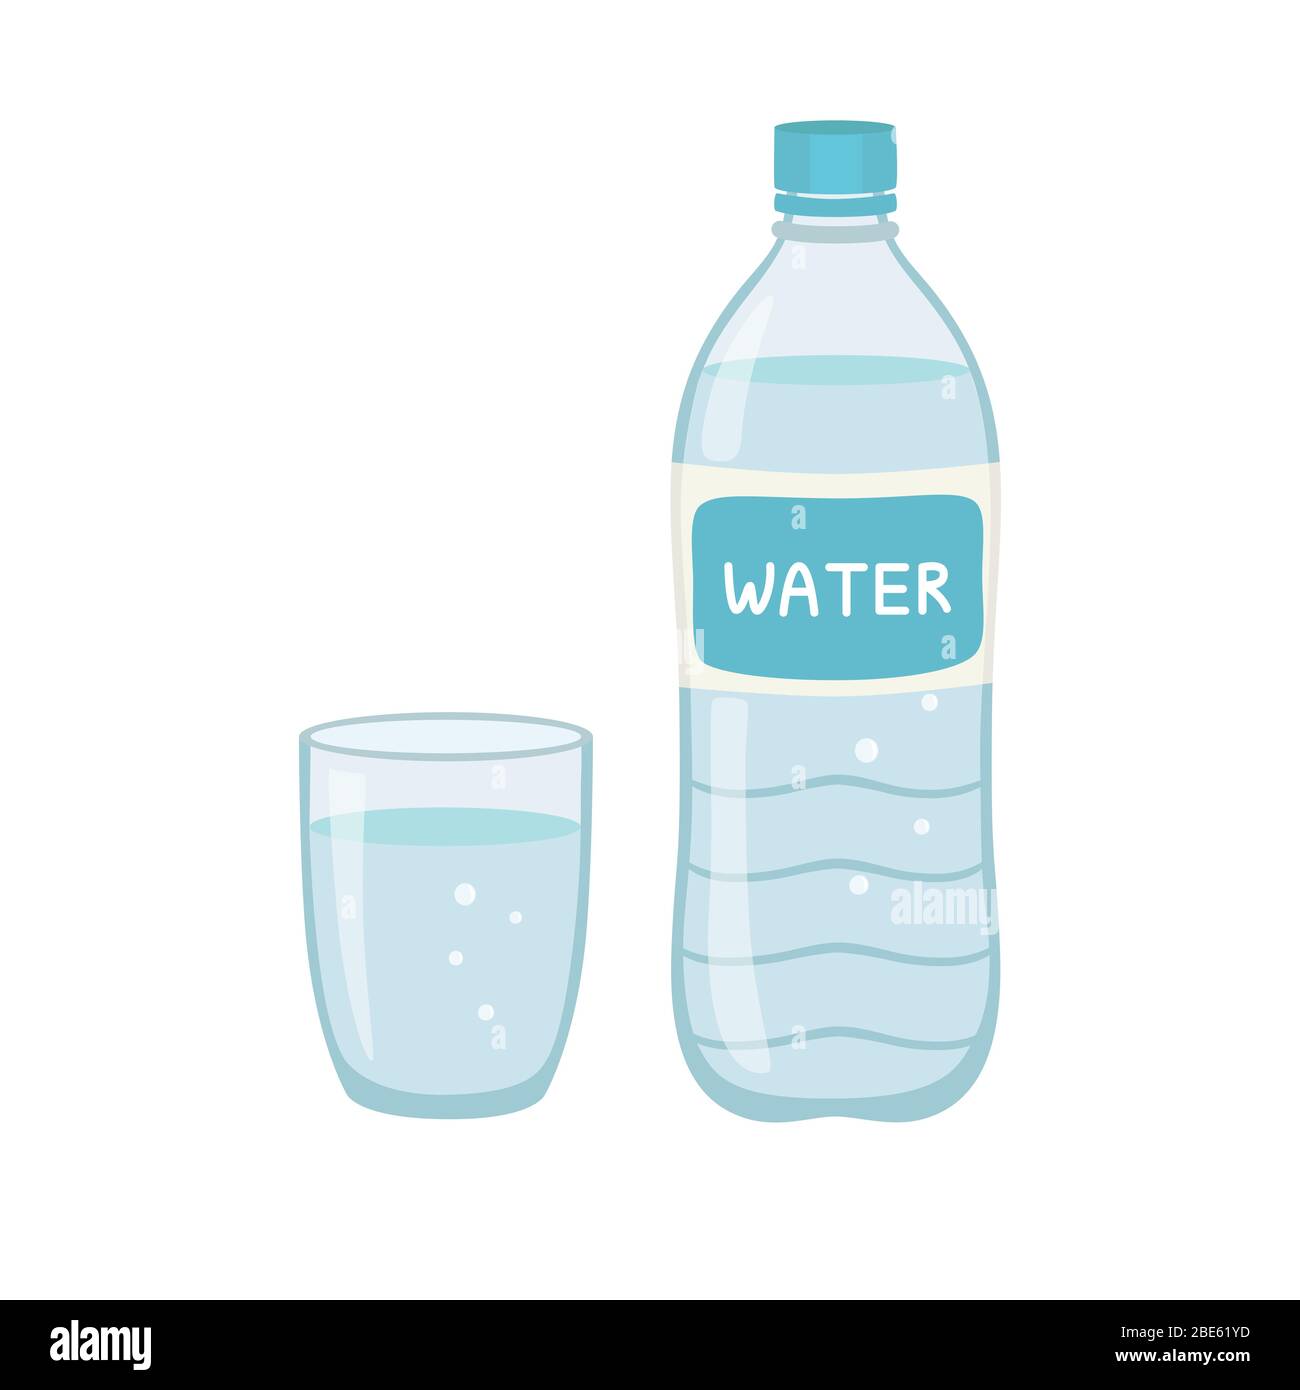 https://c8.alamy.com/comp/2BE61YD/bottle-water-natural-and-glass-vector-illustration-isolated-on-white-background-2BE61YD.jpg